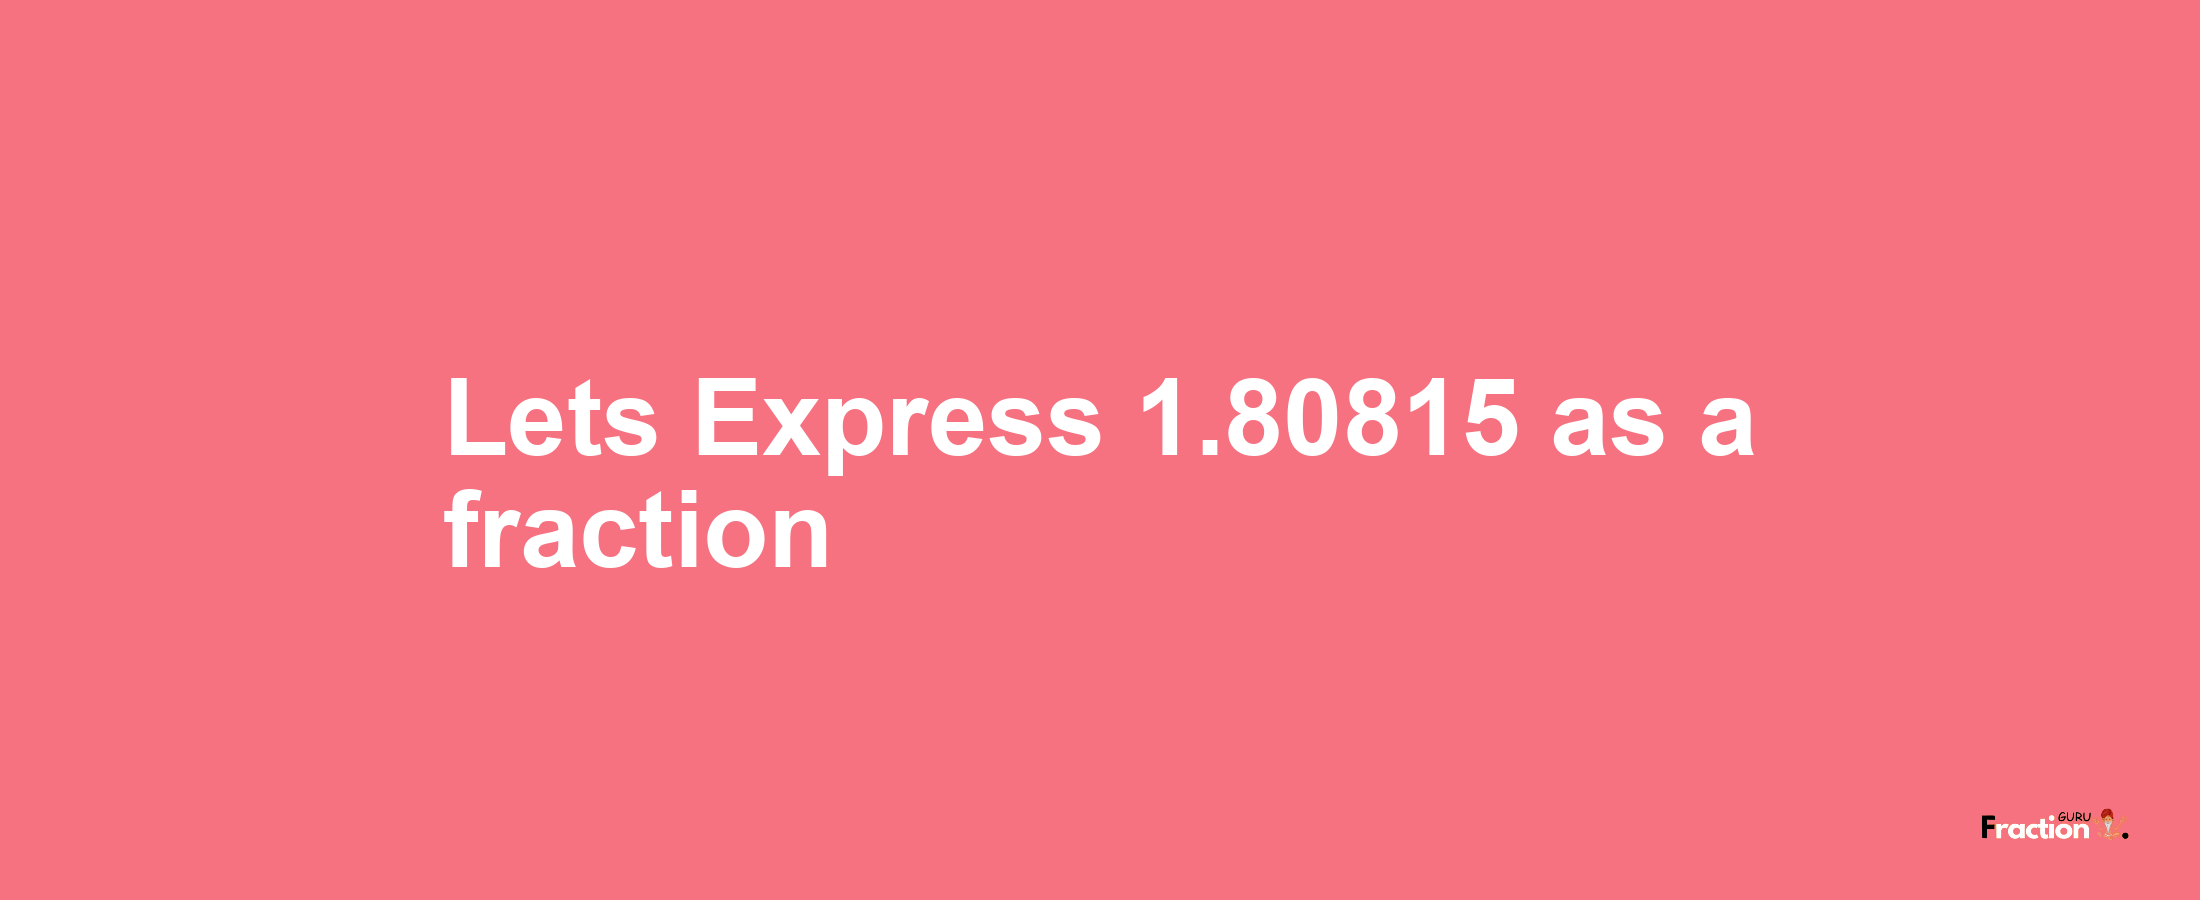 Lets Express 1.80815 as afraction